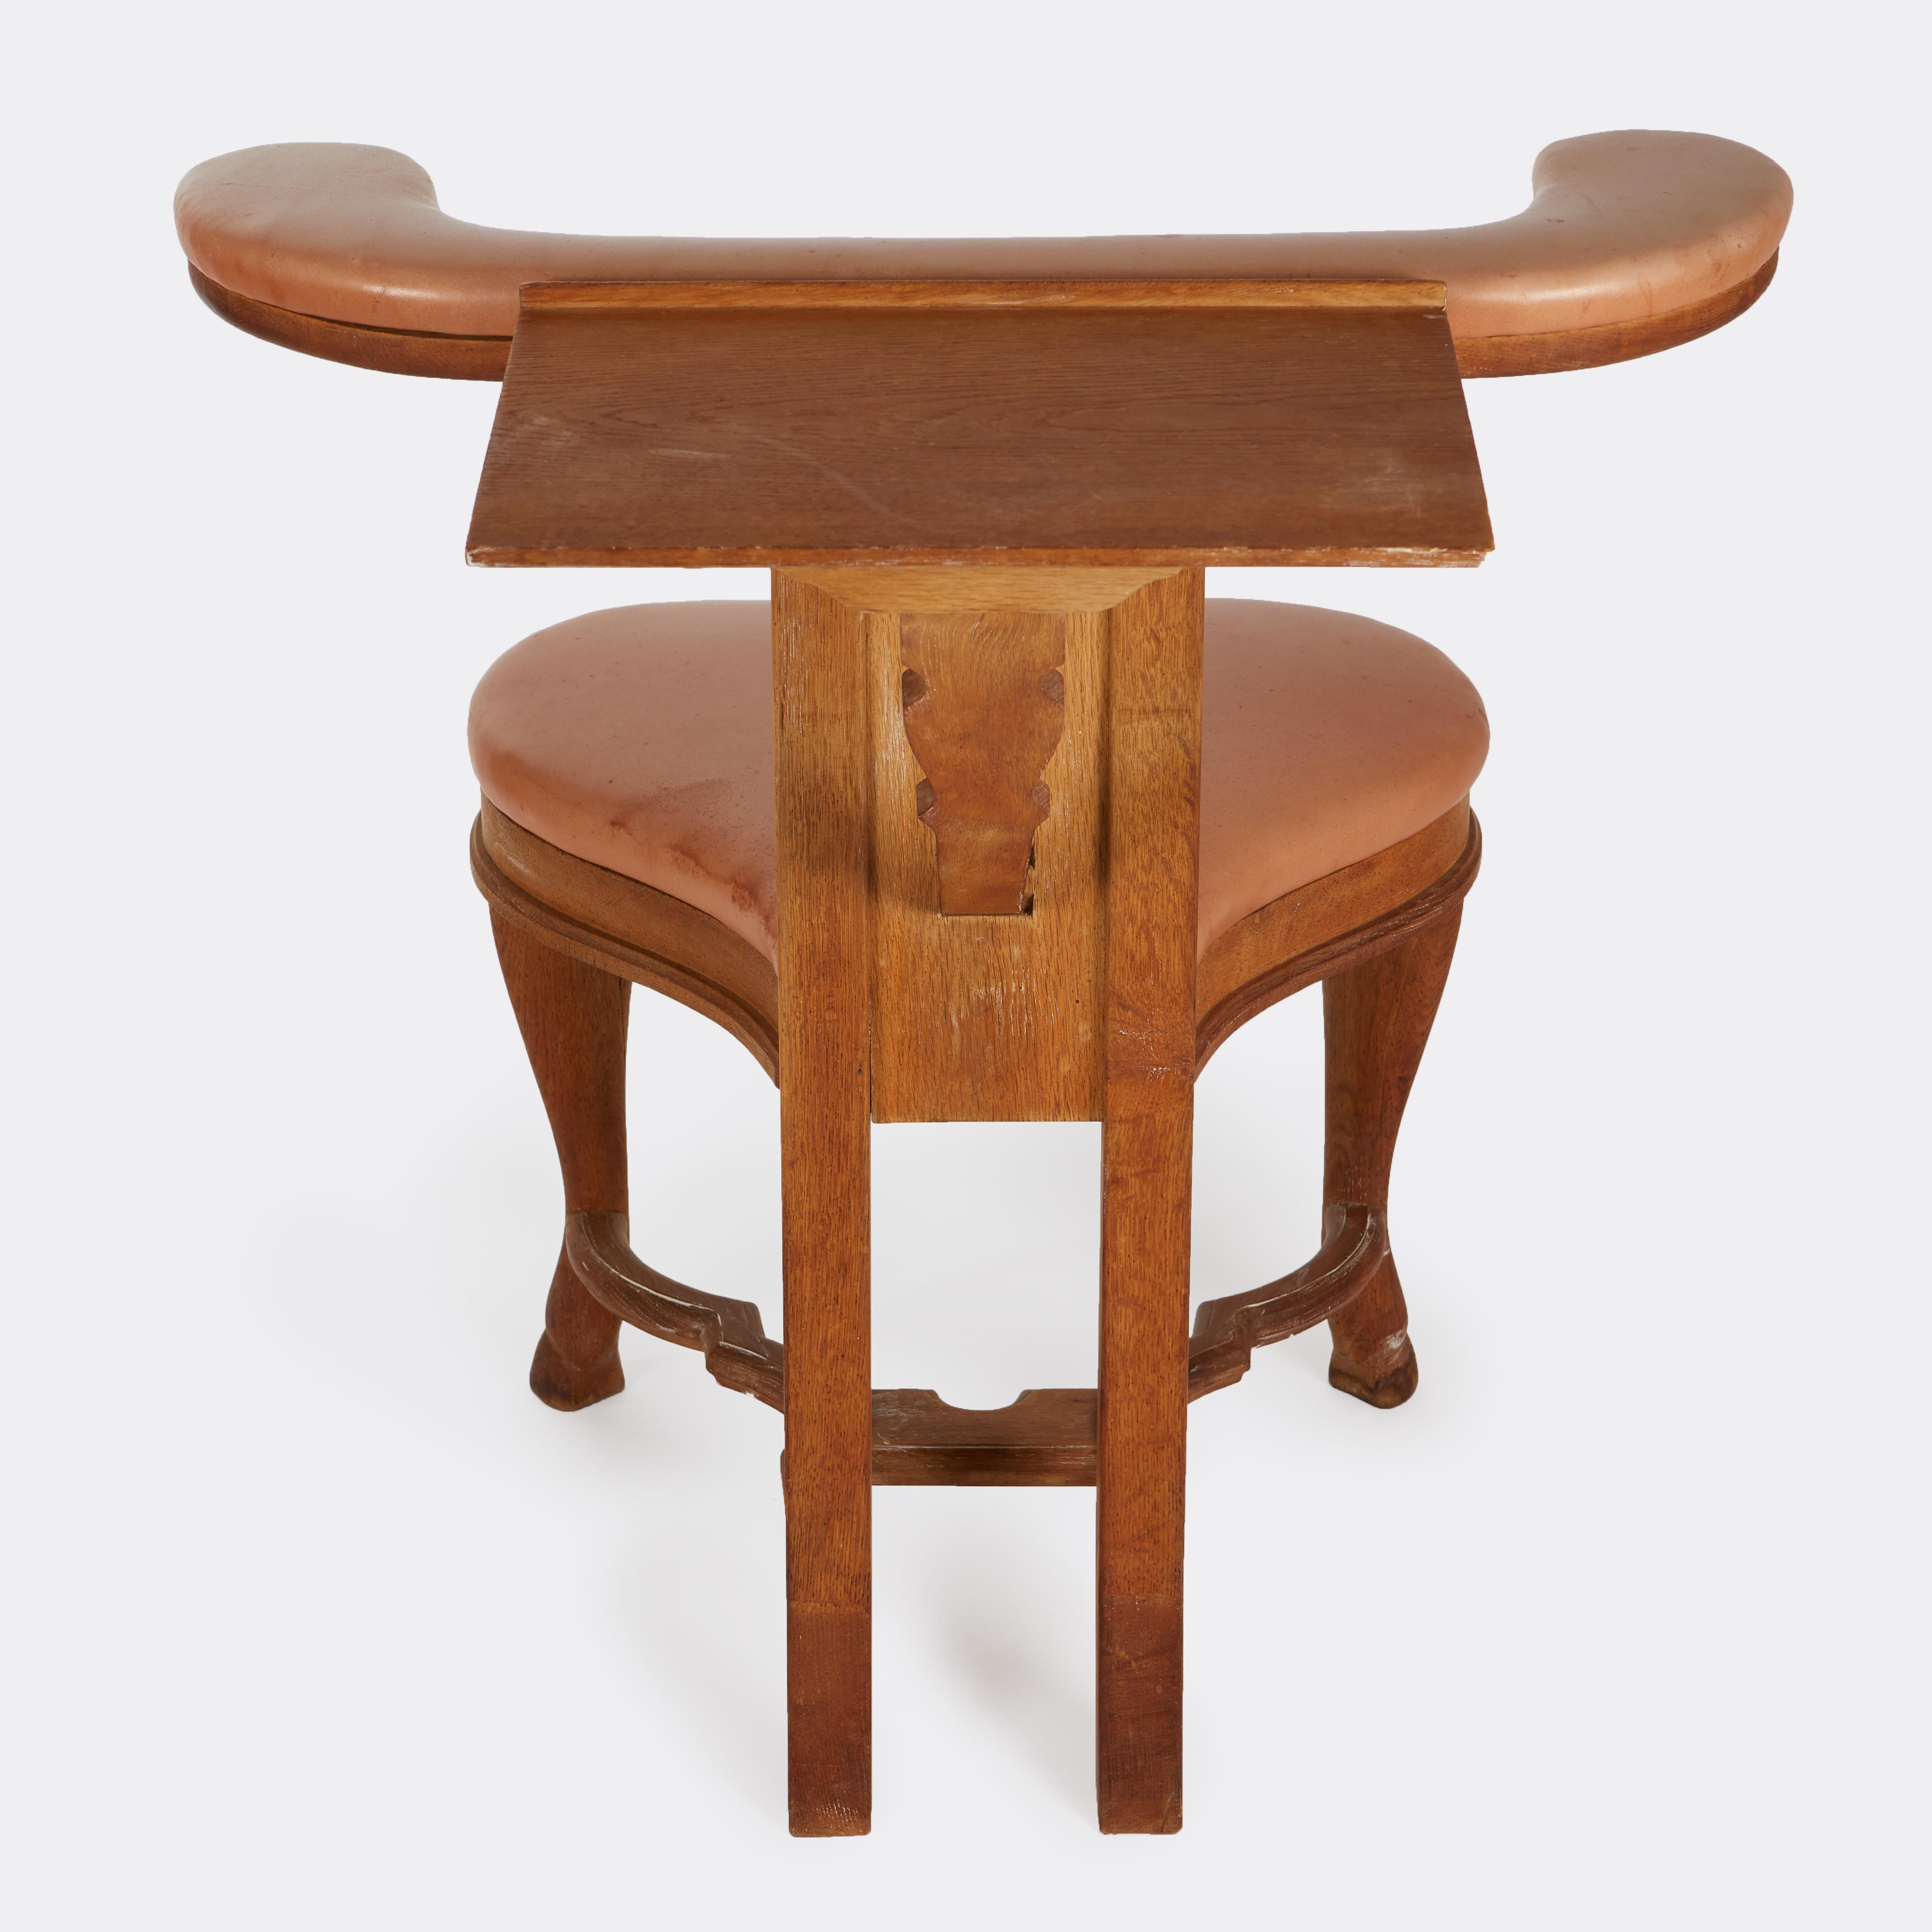 An antique hardwood reading chair with foldout surface on the back. This type of chair was used for both conventional seating, or if straddled, the small surface on the back serves as a reading or writing desk.